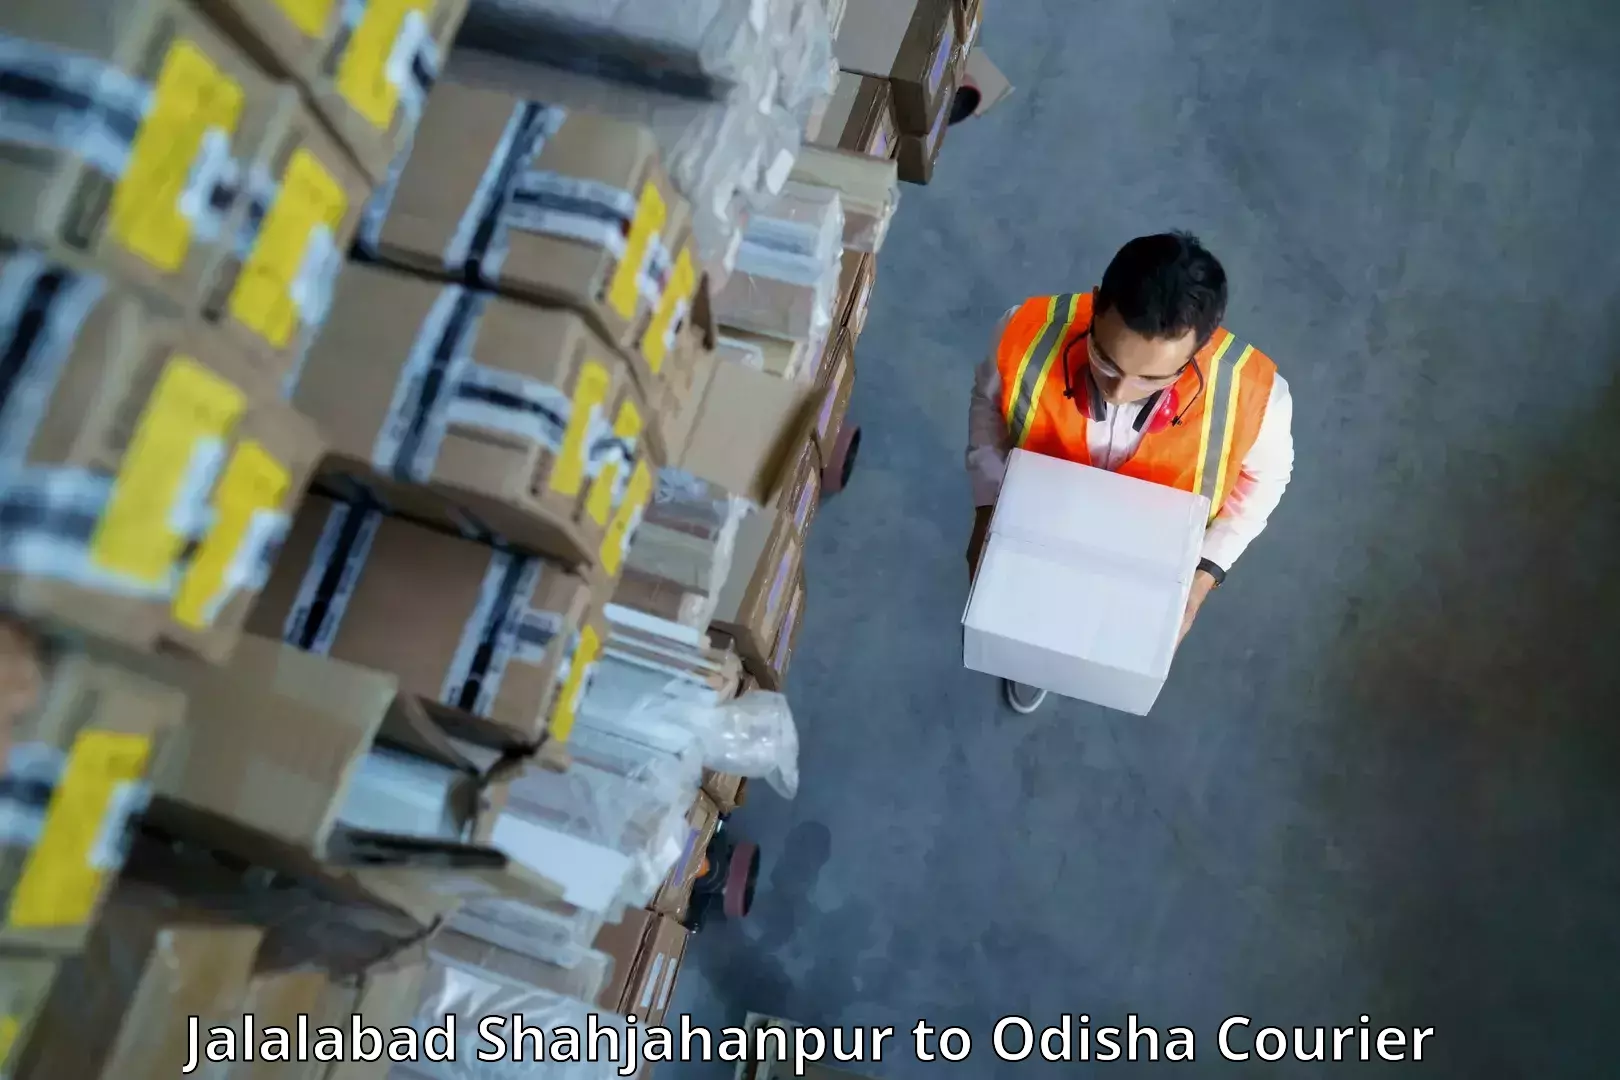 Express courier capabilities in Jalalabad Shahjahanpur to Baleswar